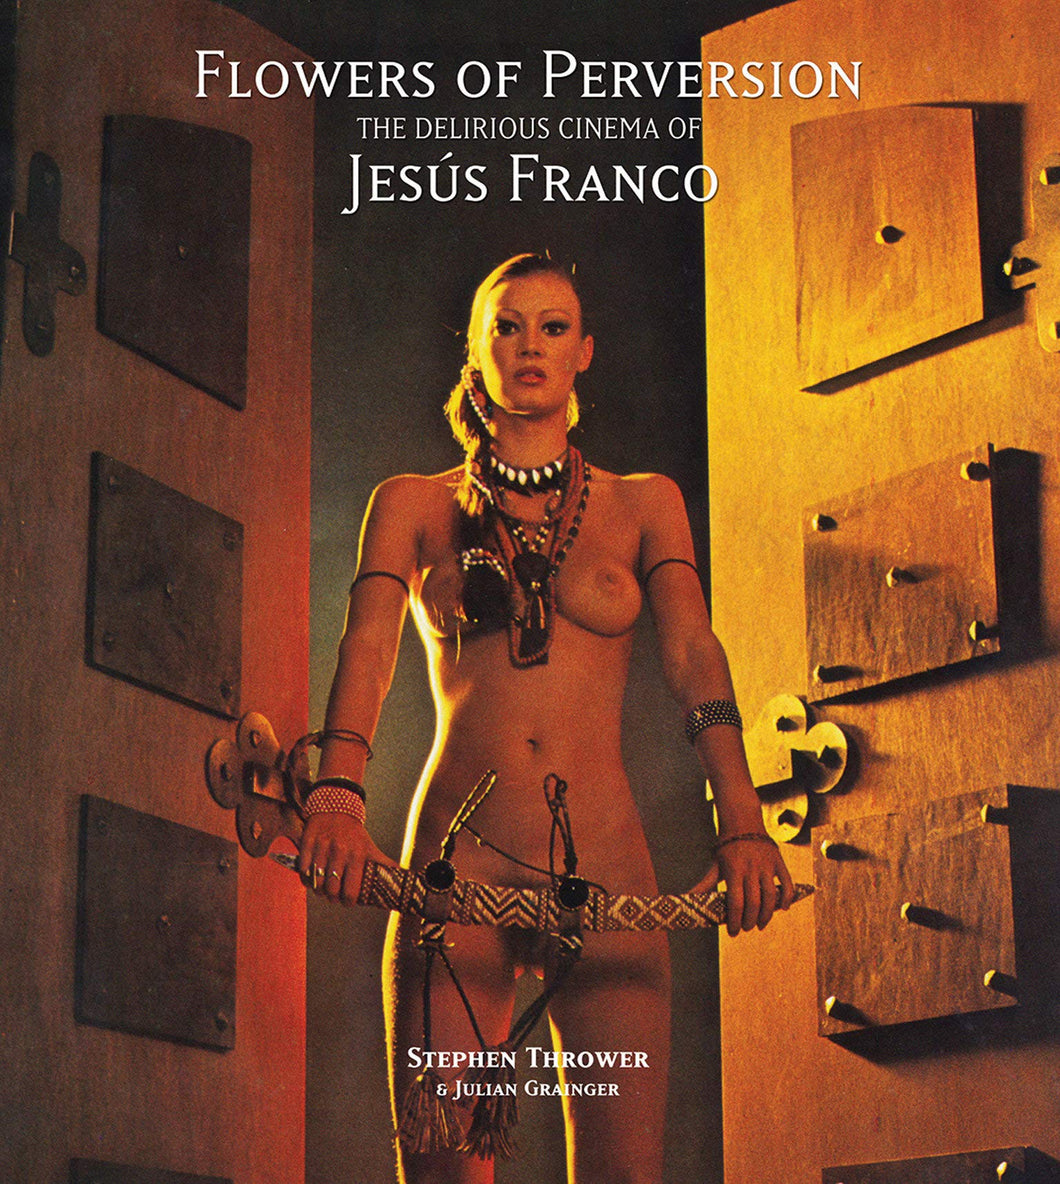 Flowers of Perversion - The Delirious Cinema of Jesus Franco de Stephen Thrower - front cover